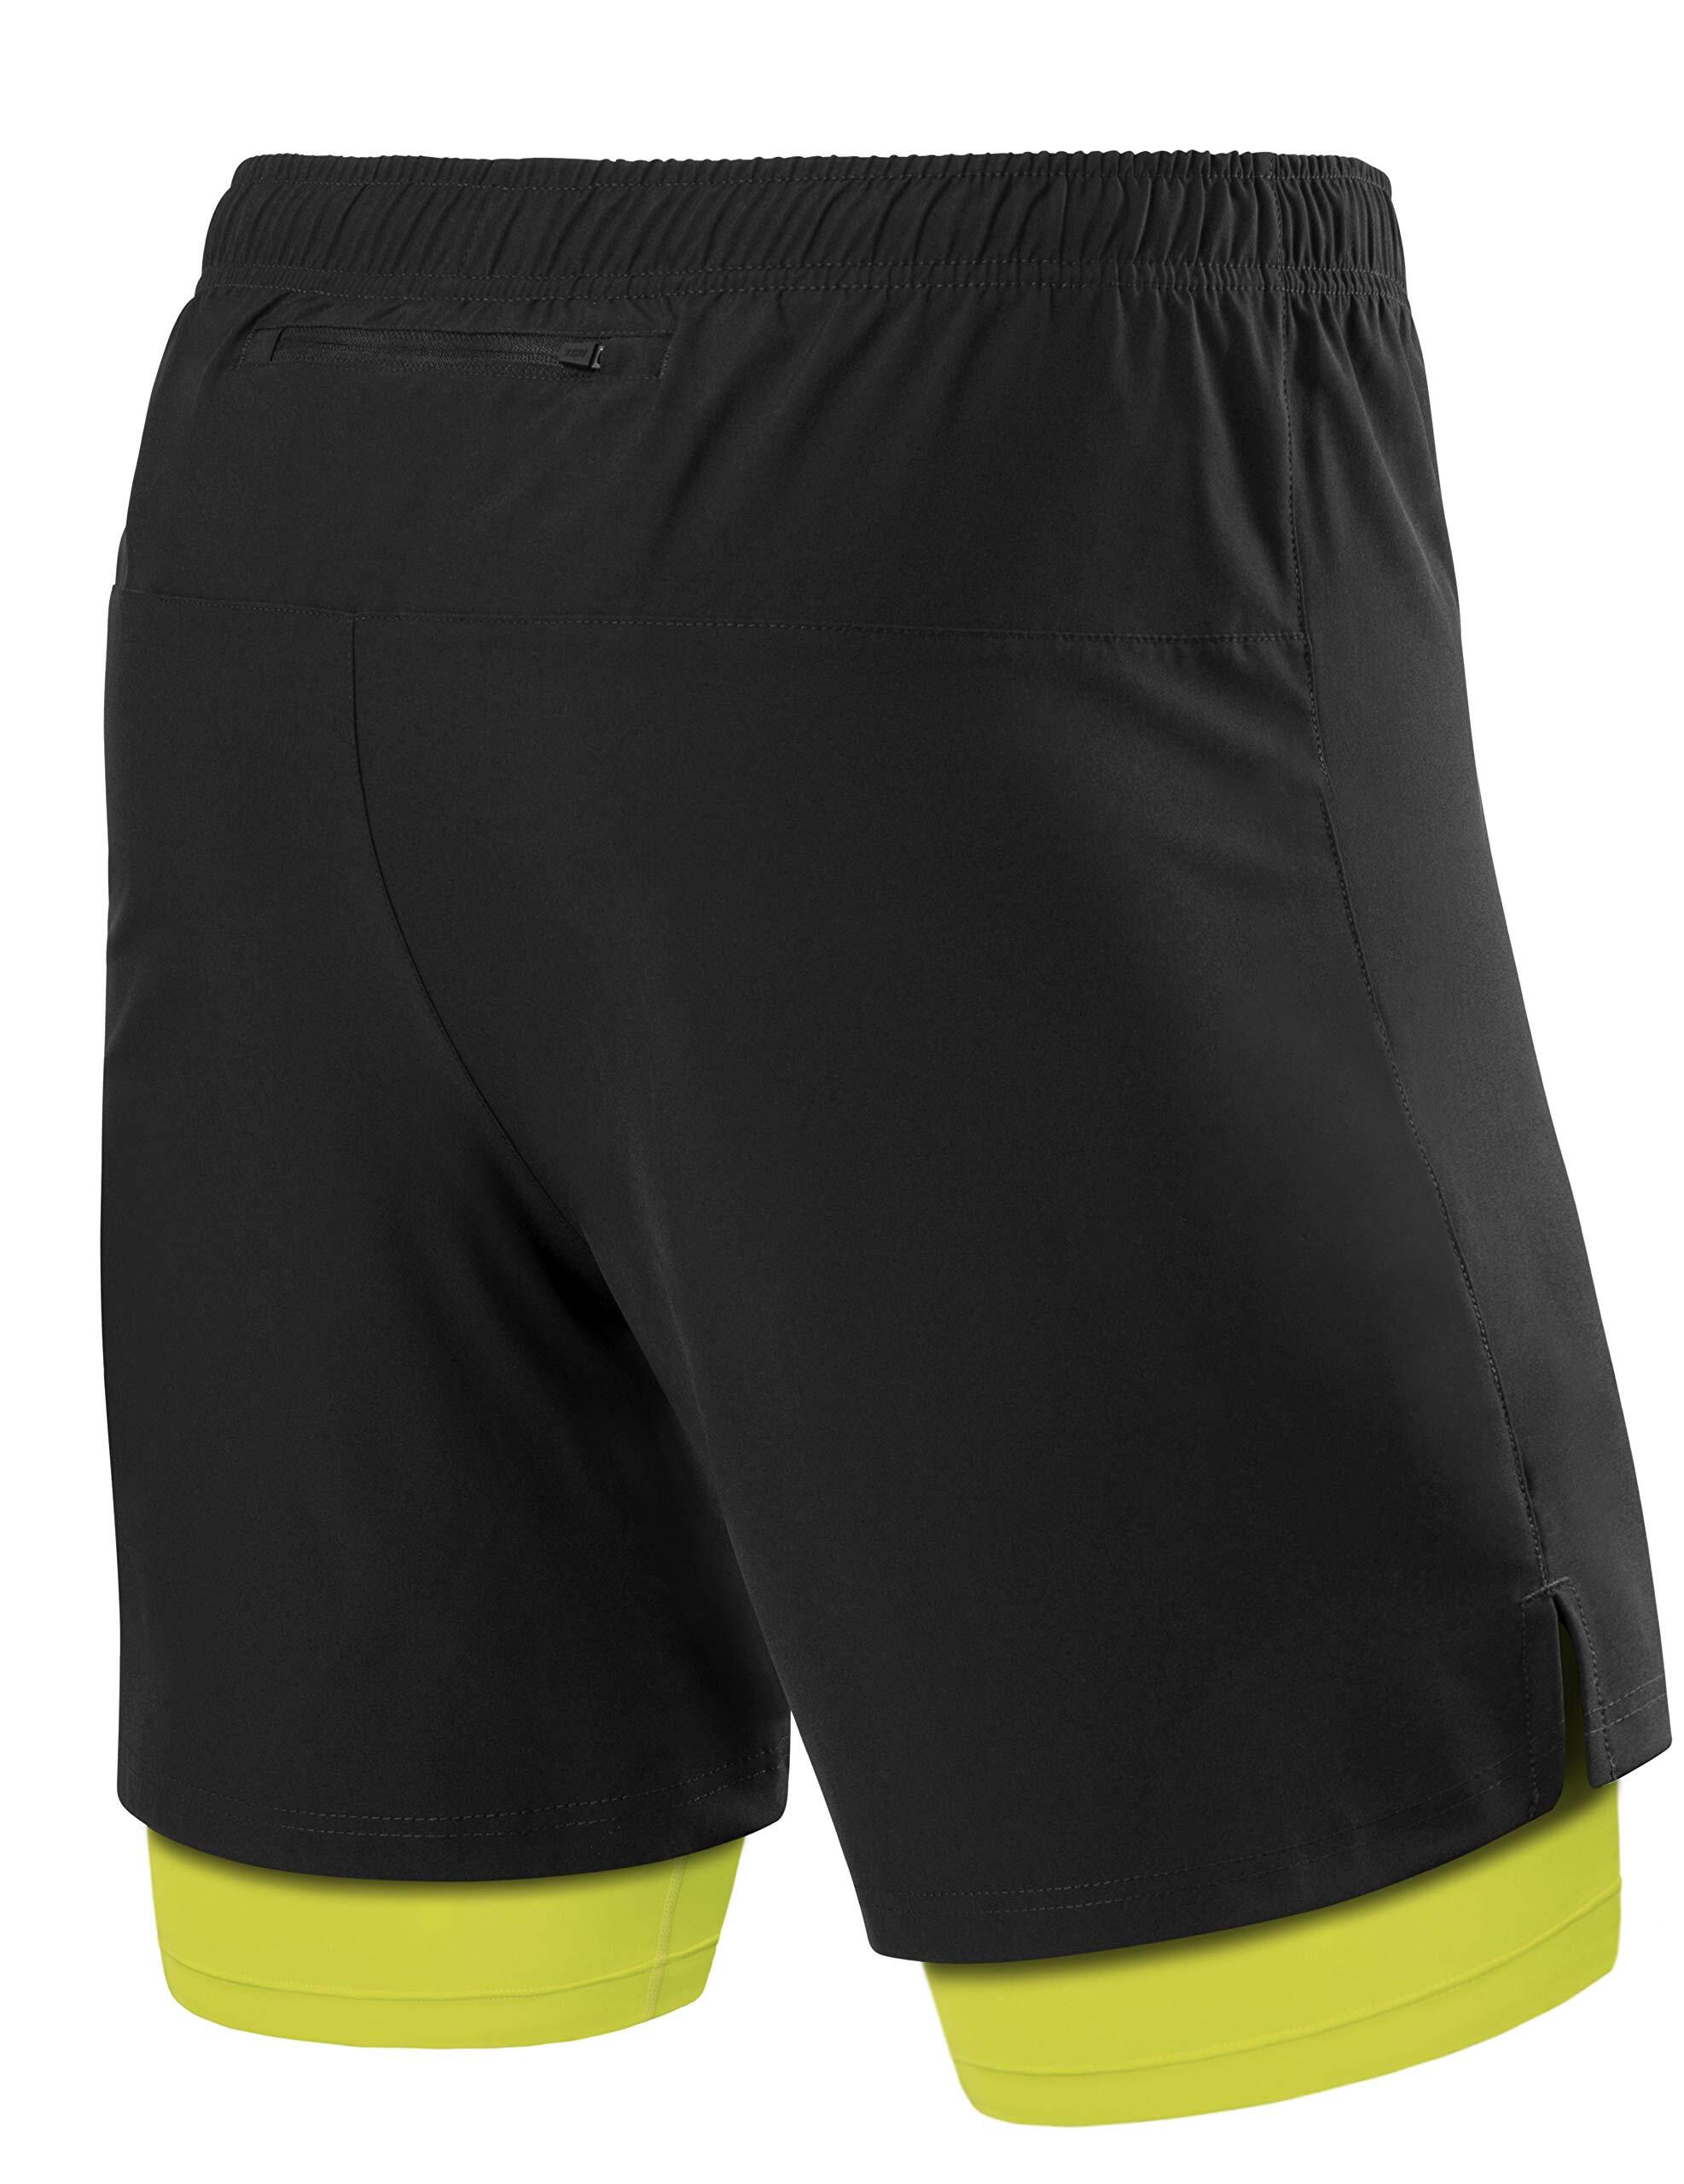 Men's Ultra 2-in-1 Running Shorts with Key Pocket - Black / Lime Punch 2/5